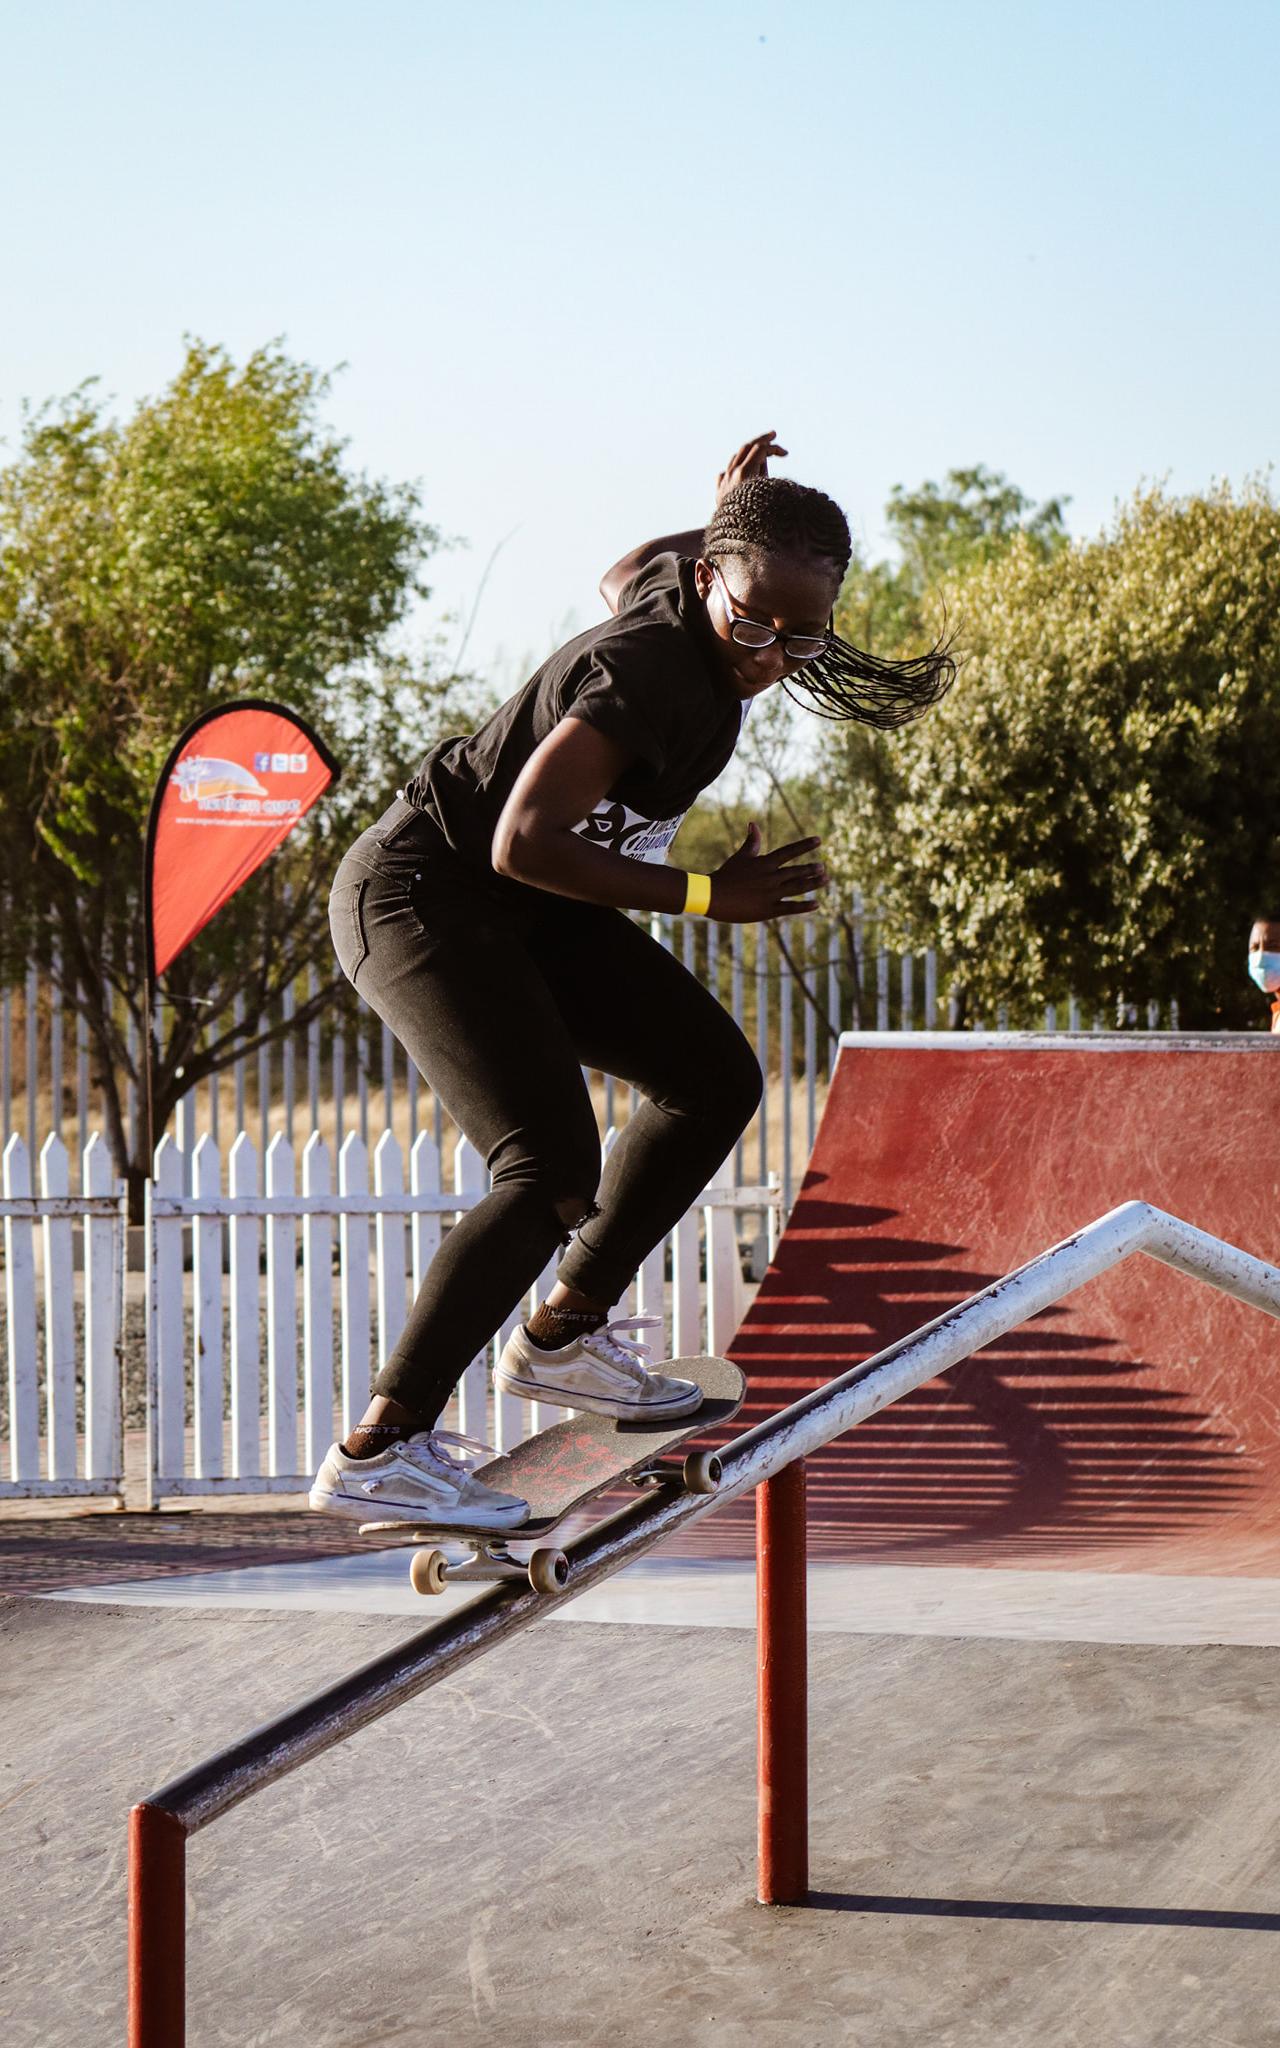 Beautiful News - Boipelo Awuah from Kimberley in Northern Cape South Africa skateboarding on a rail on a 